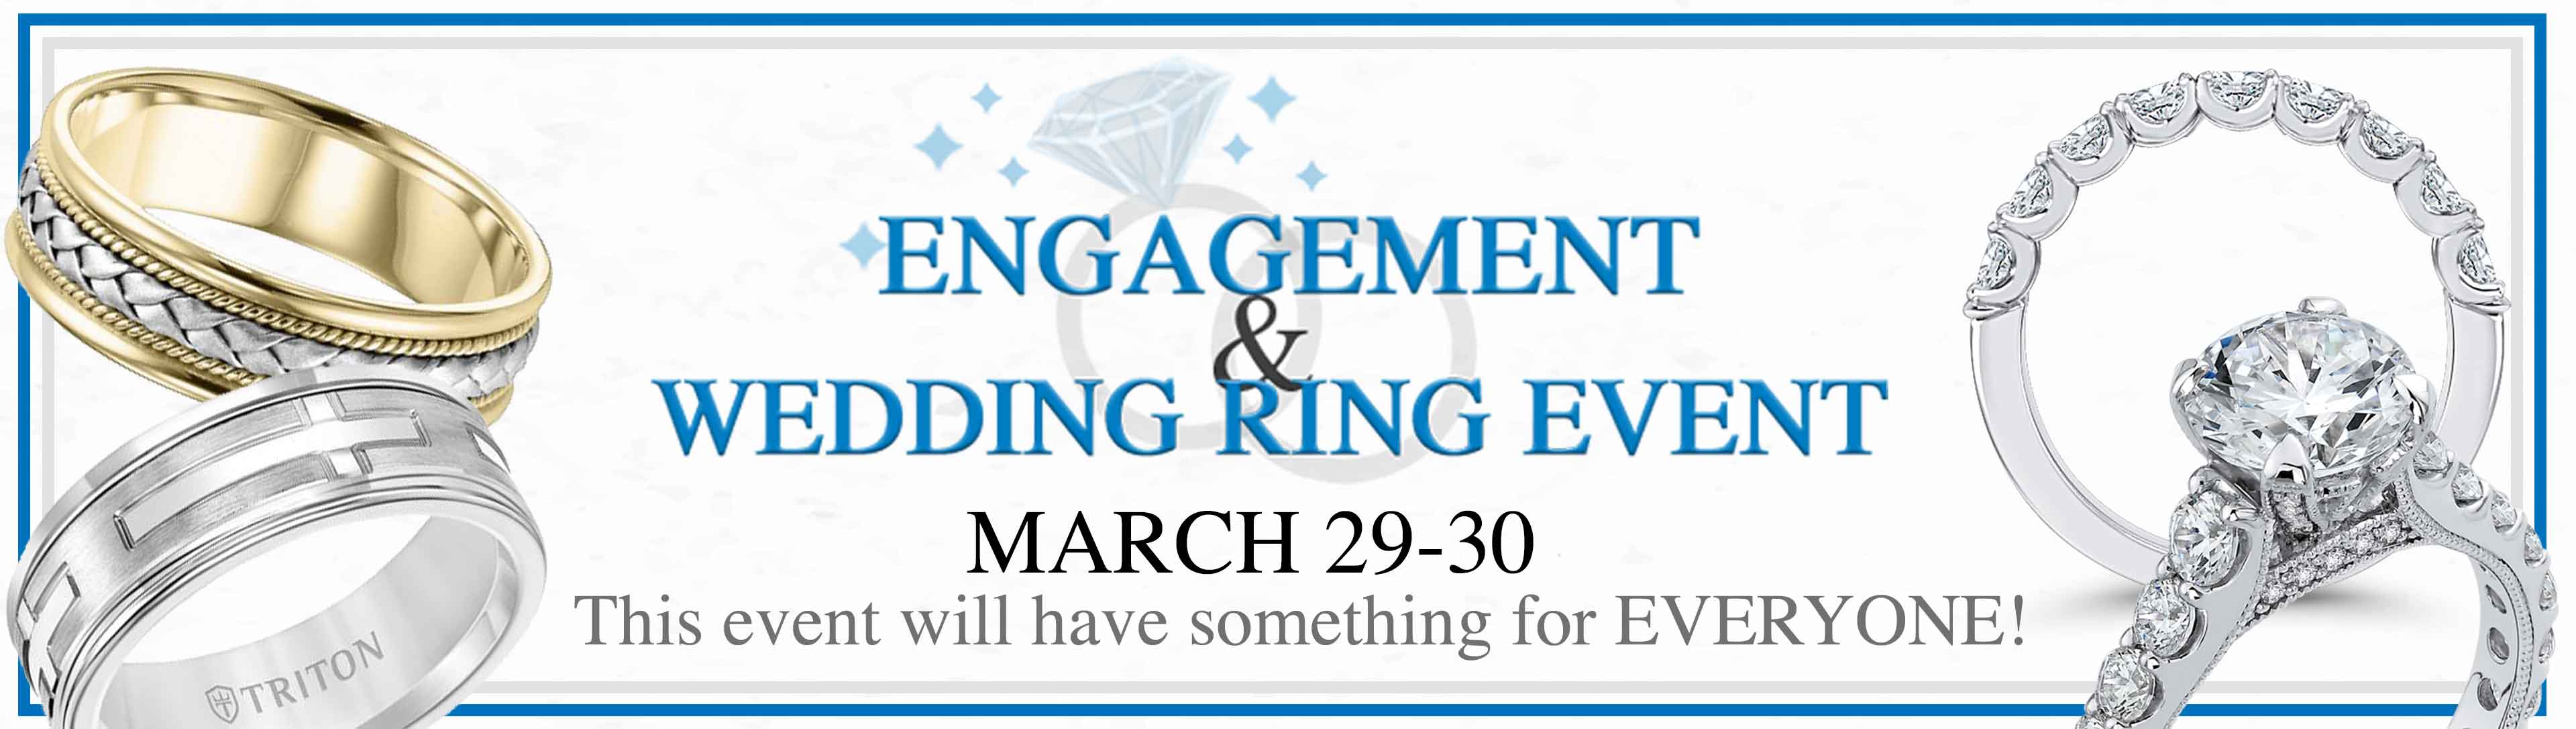 Engagement and Wedding Band Event